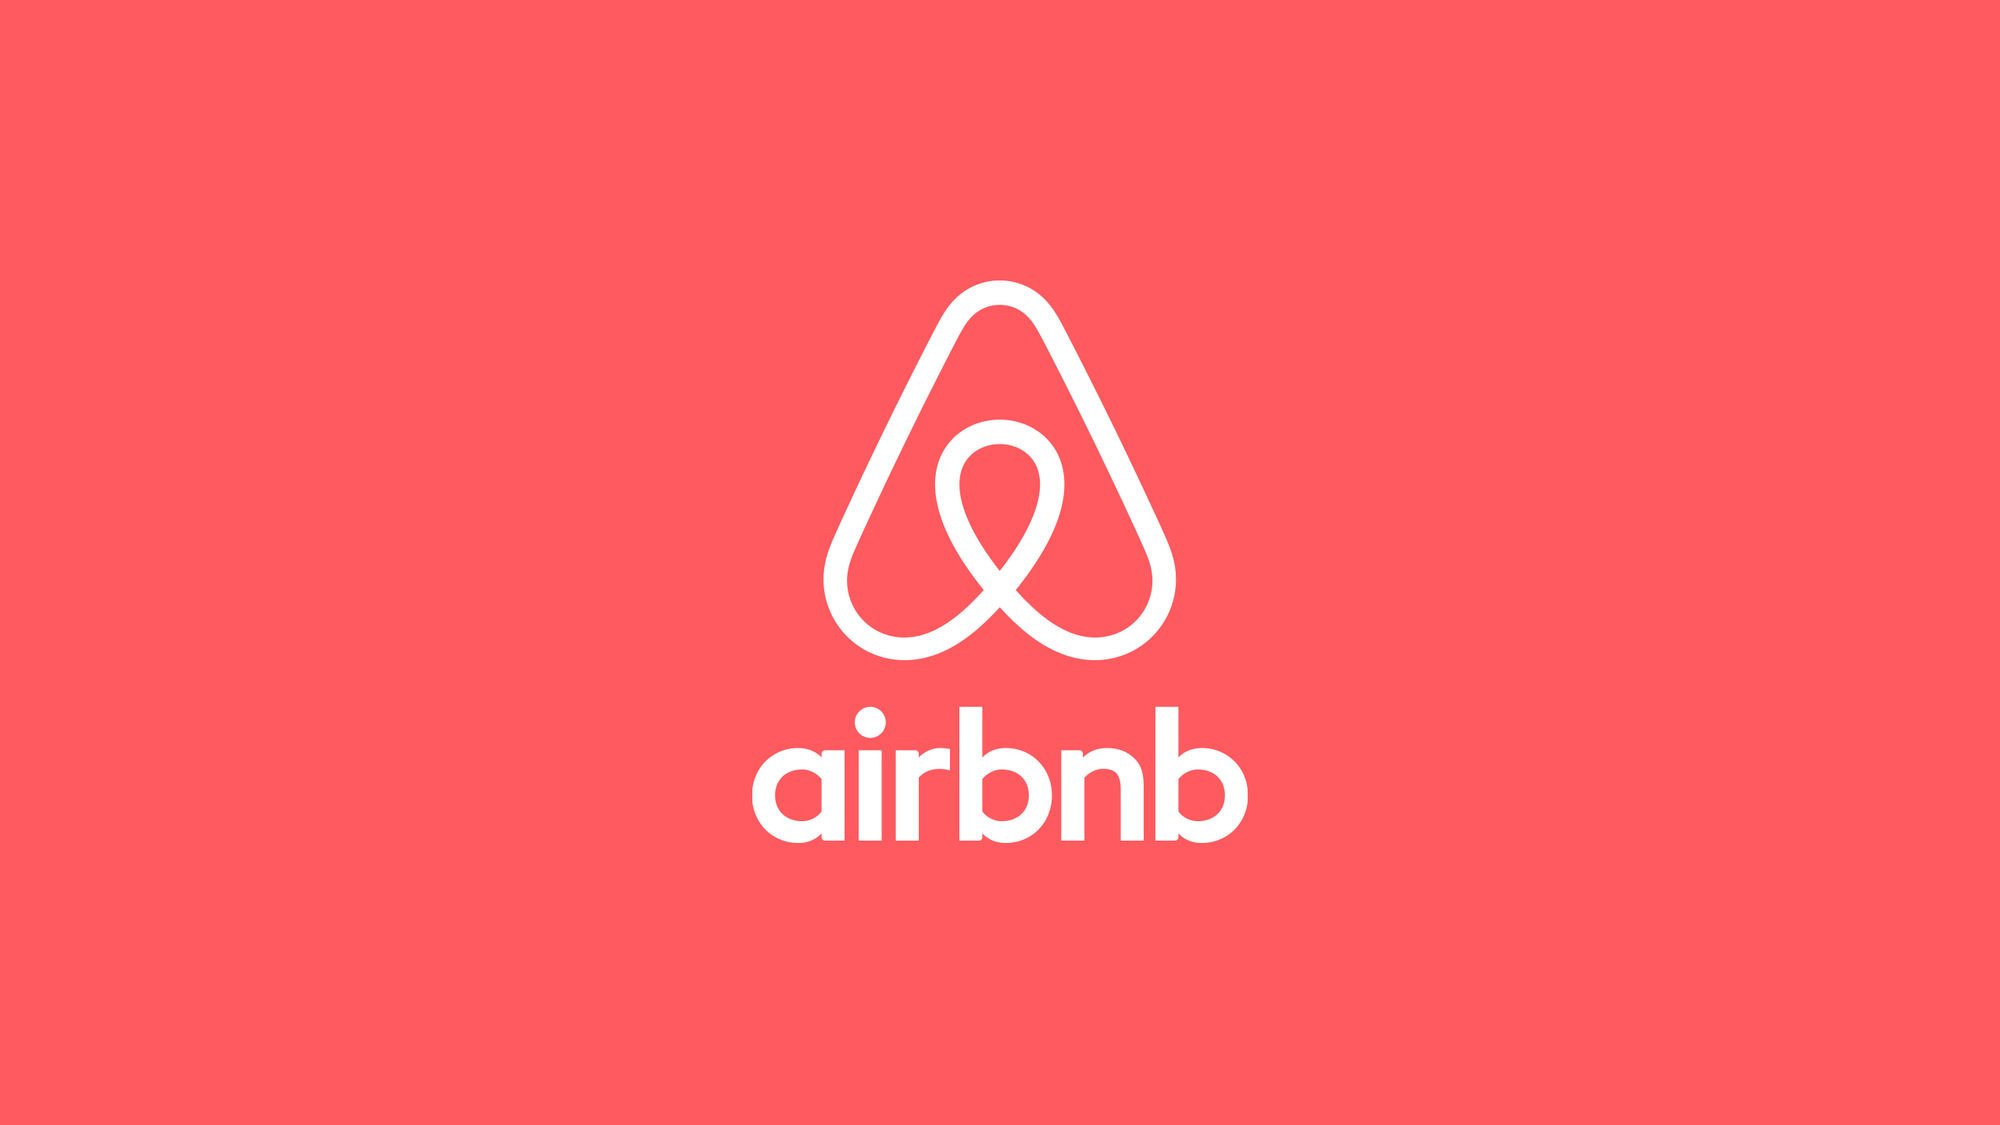 Data shows declining Airbnb listings as city cracks down